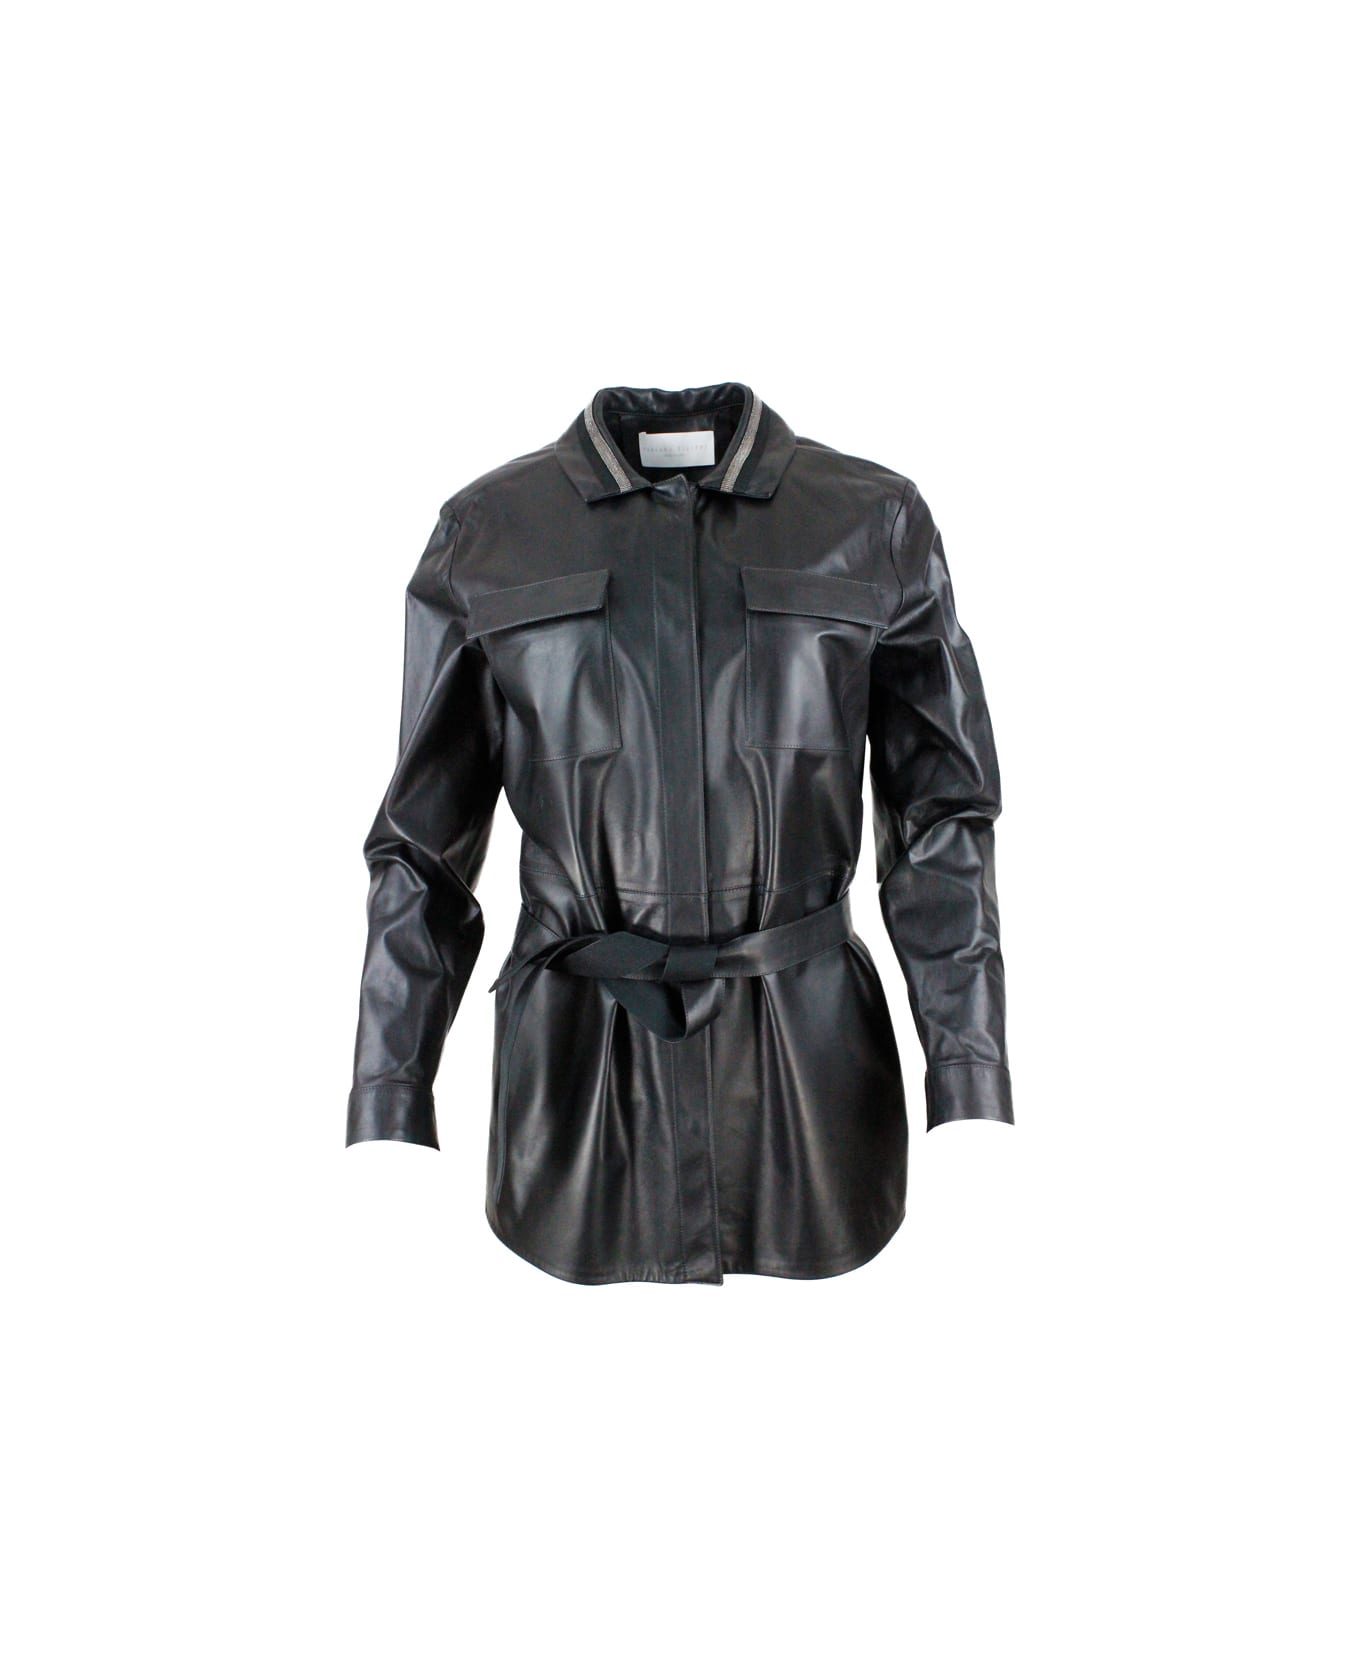 Fabiana Filippi Leather Shirt Jacket With Button Closure, With Belt And With Monile On The Collar - Black コート